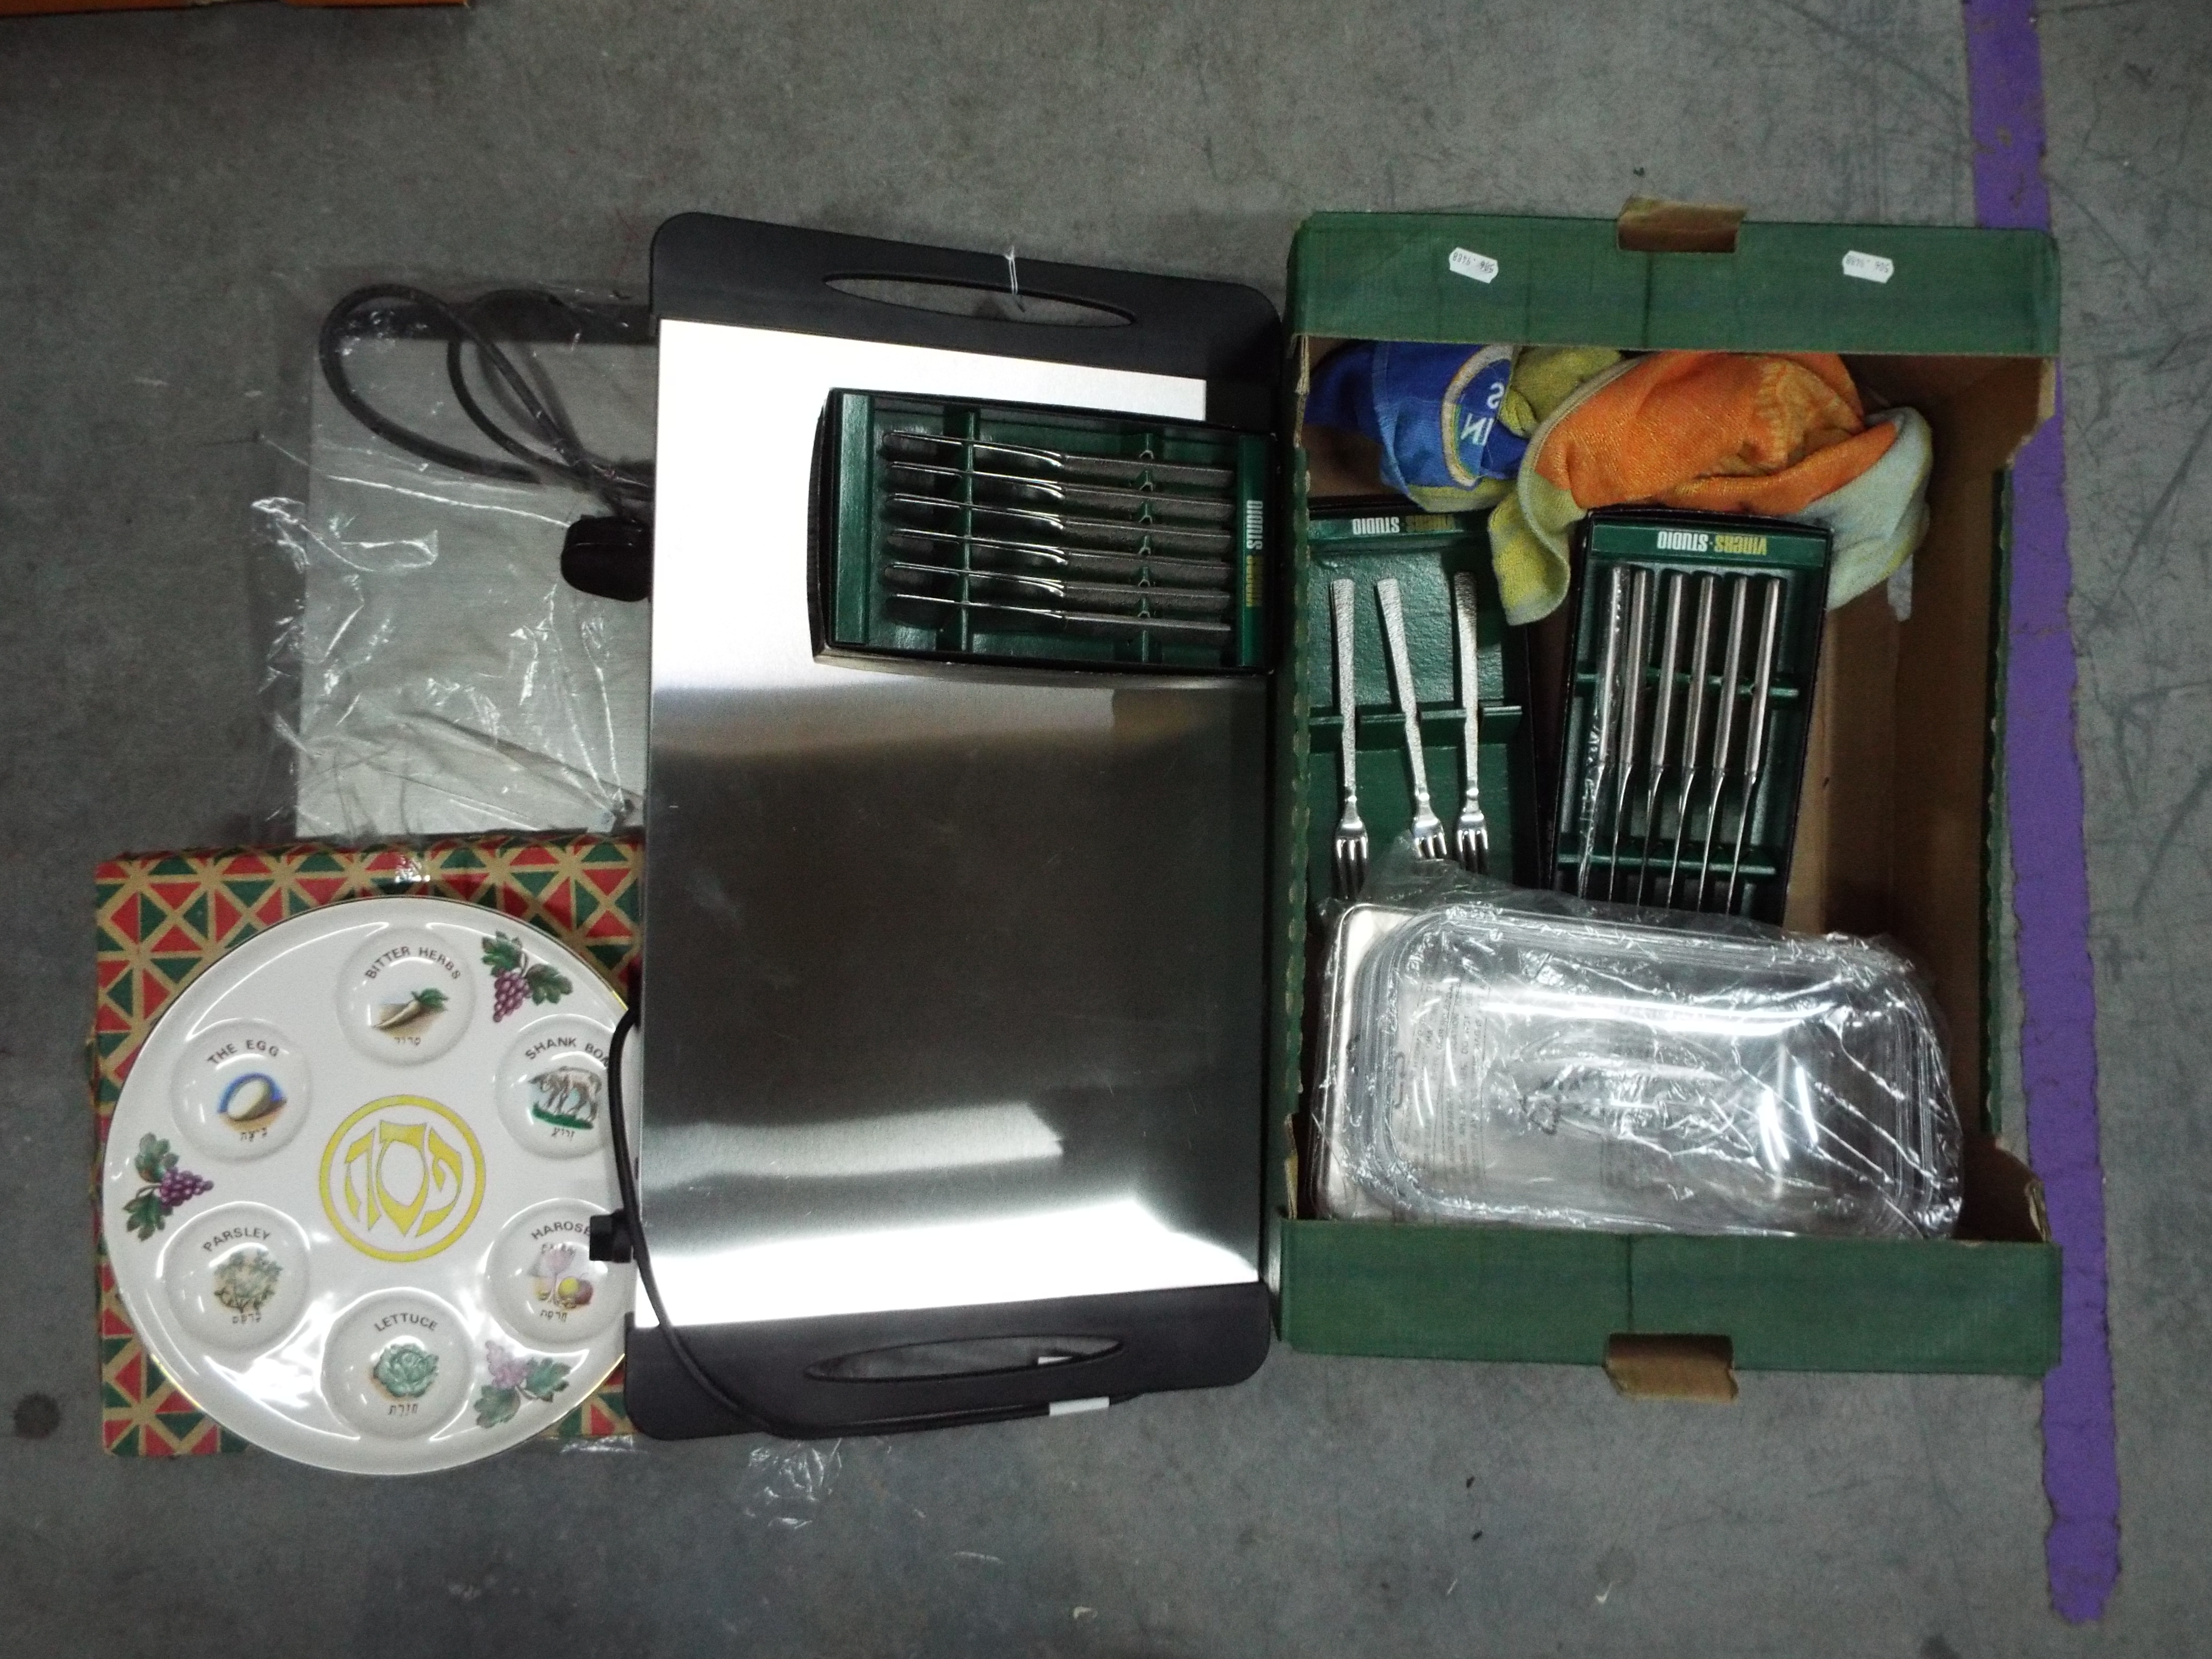 Two table top food warmers, boxed Viners flatware,